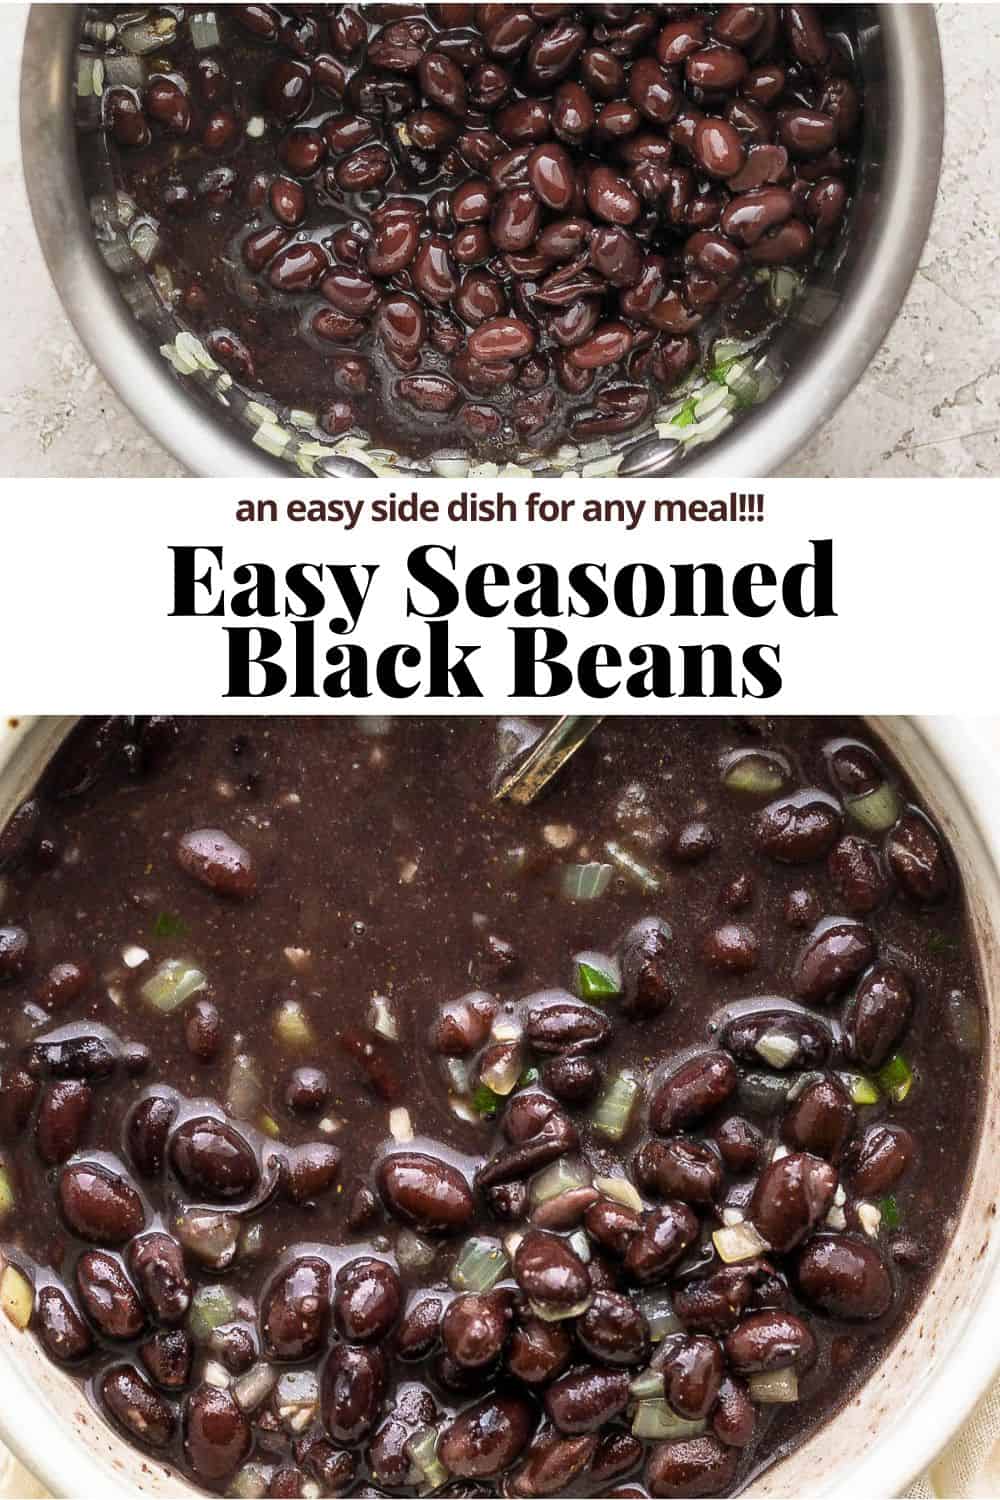 Pinterest image with the title that reads "an easy side dish for any meal. Seasoned Black beans".